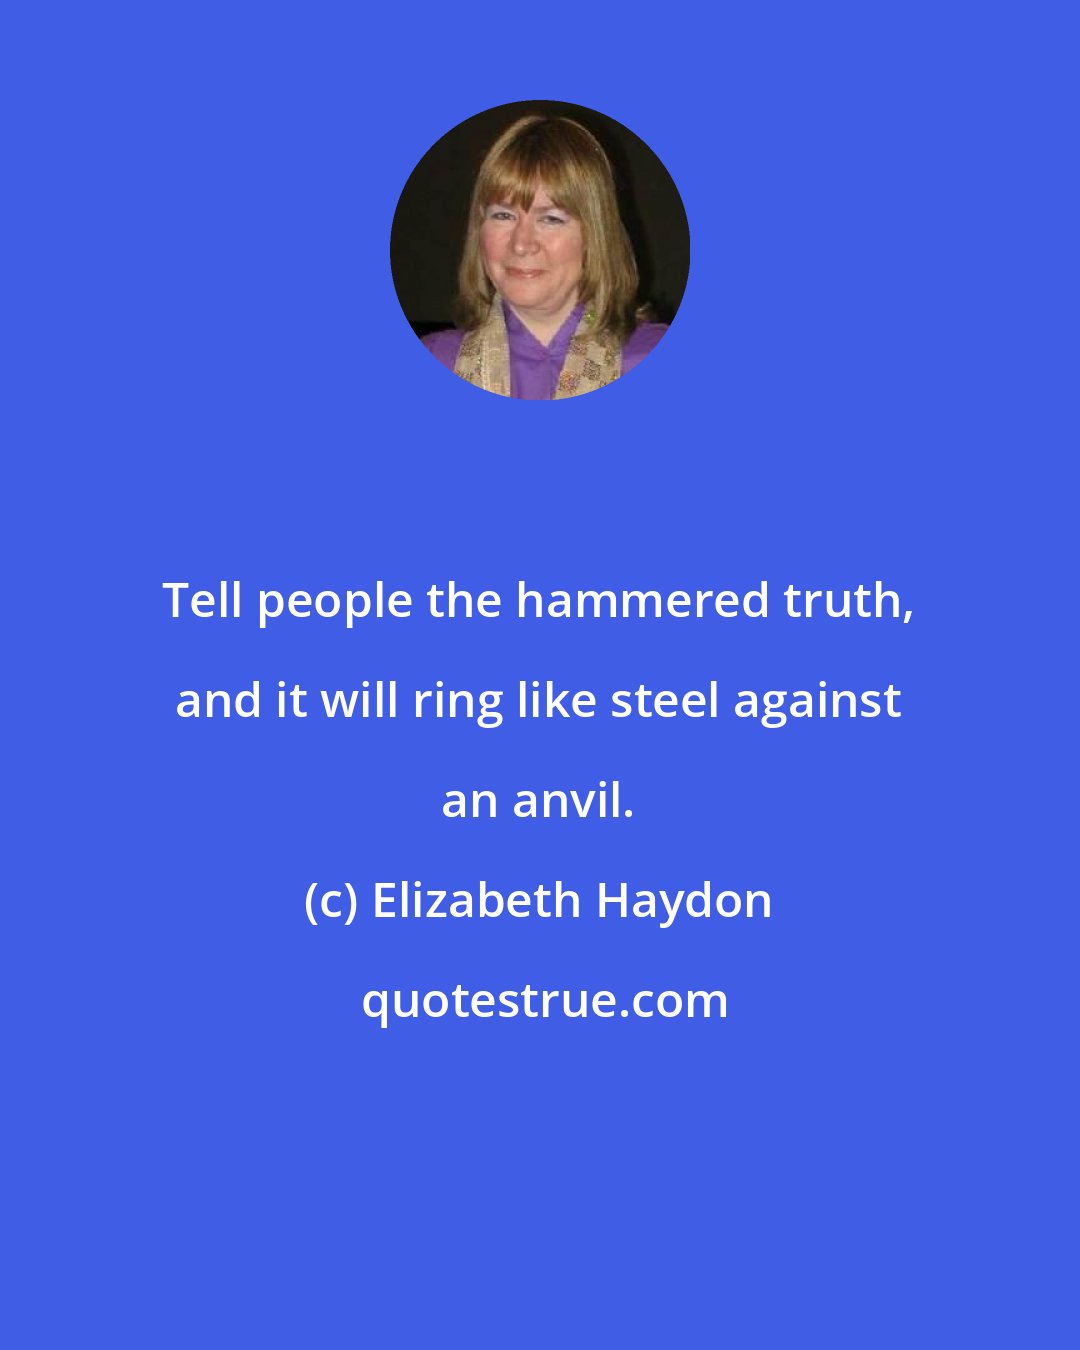 Elizabeth Haydon: Tell people the hammered truth, and it will ring like steel against an anvil.